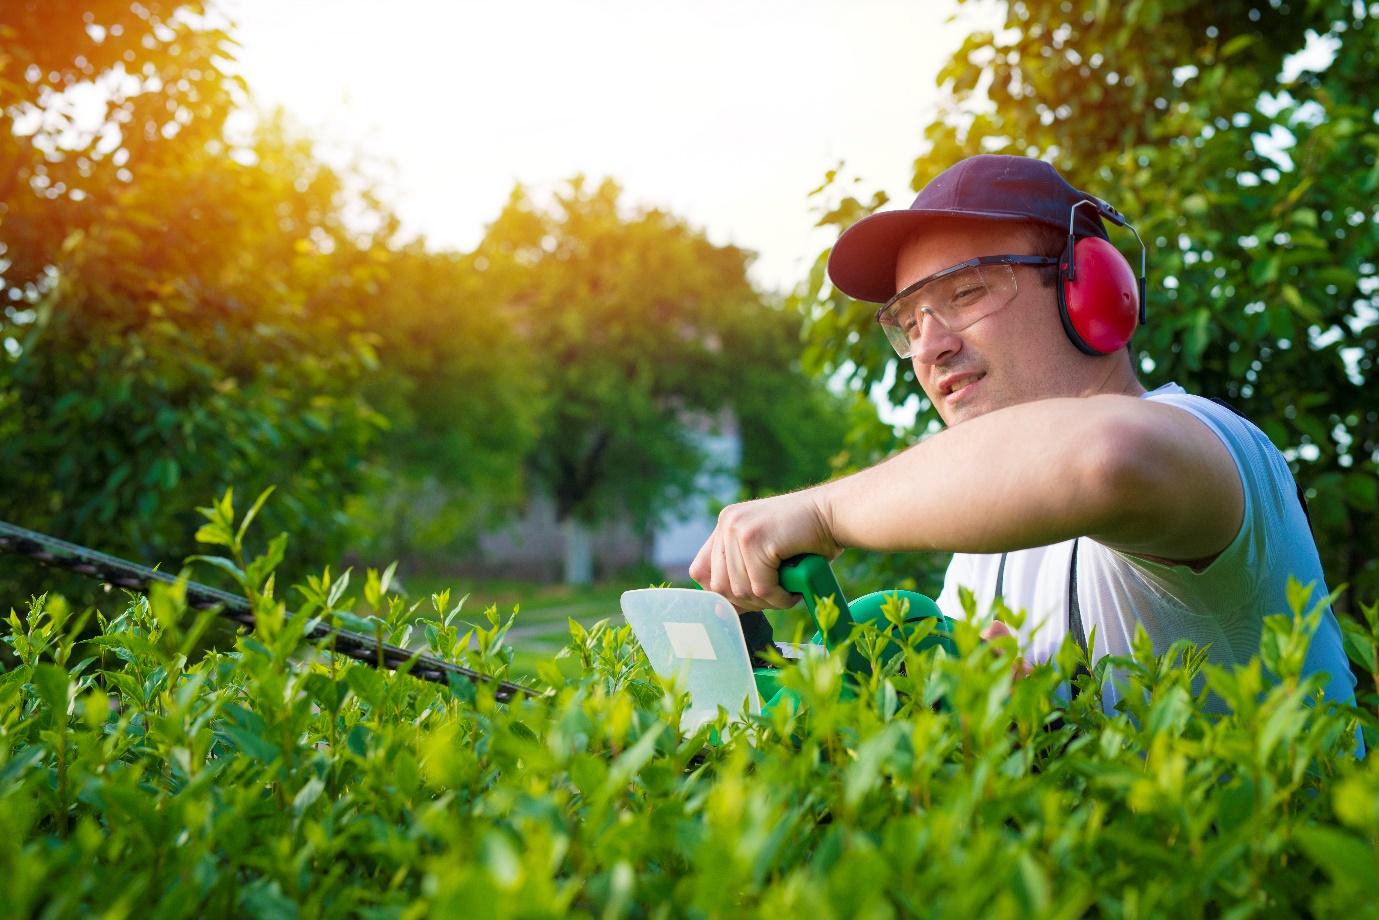 A person wearing earphones and glasses working in a hedge

Description automatically generated